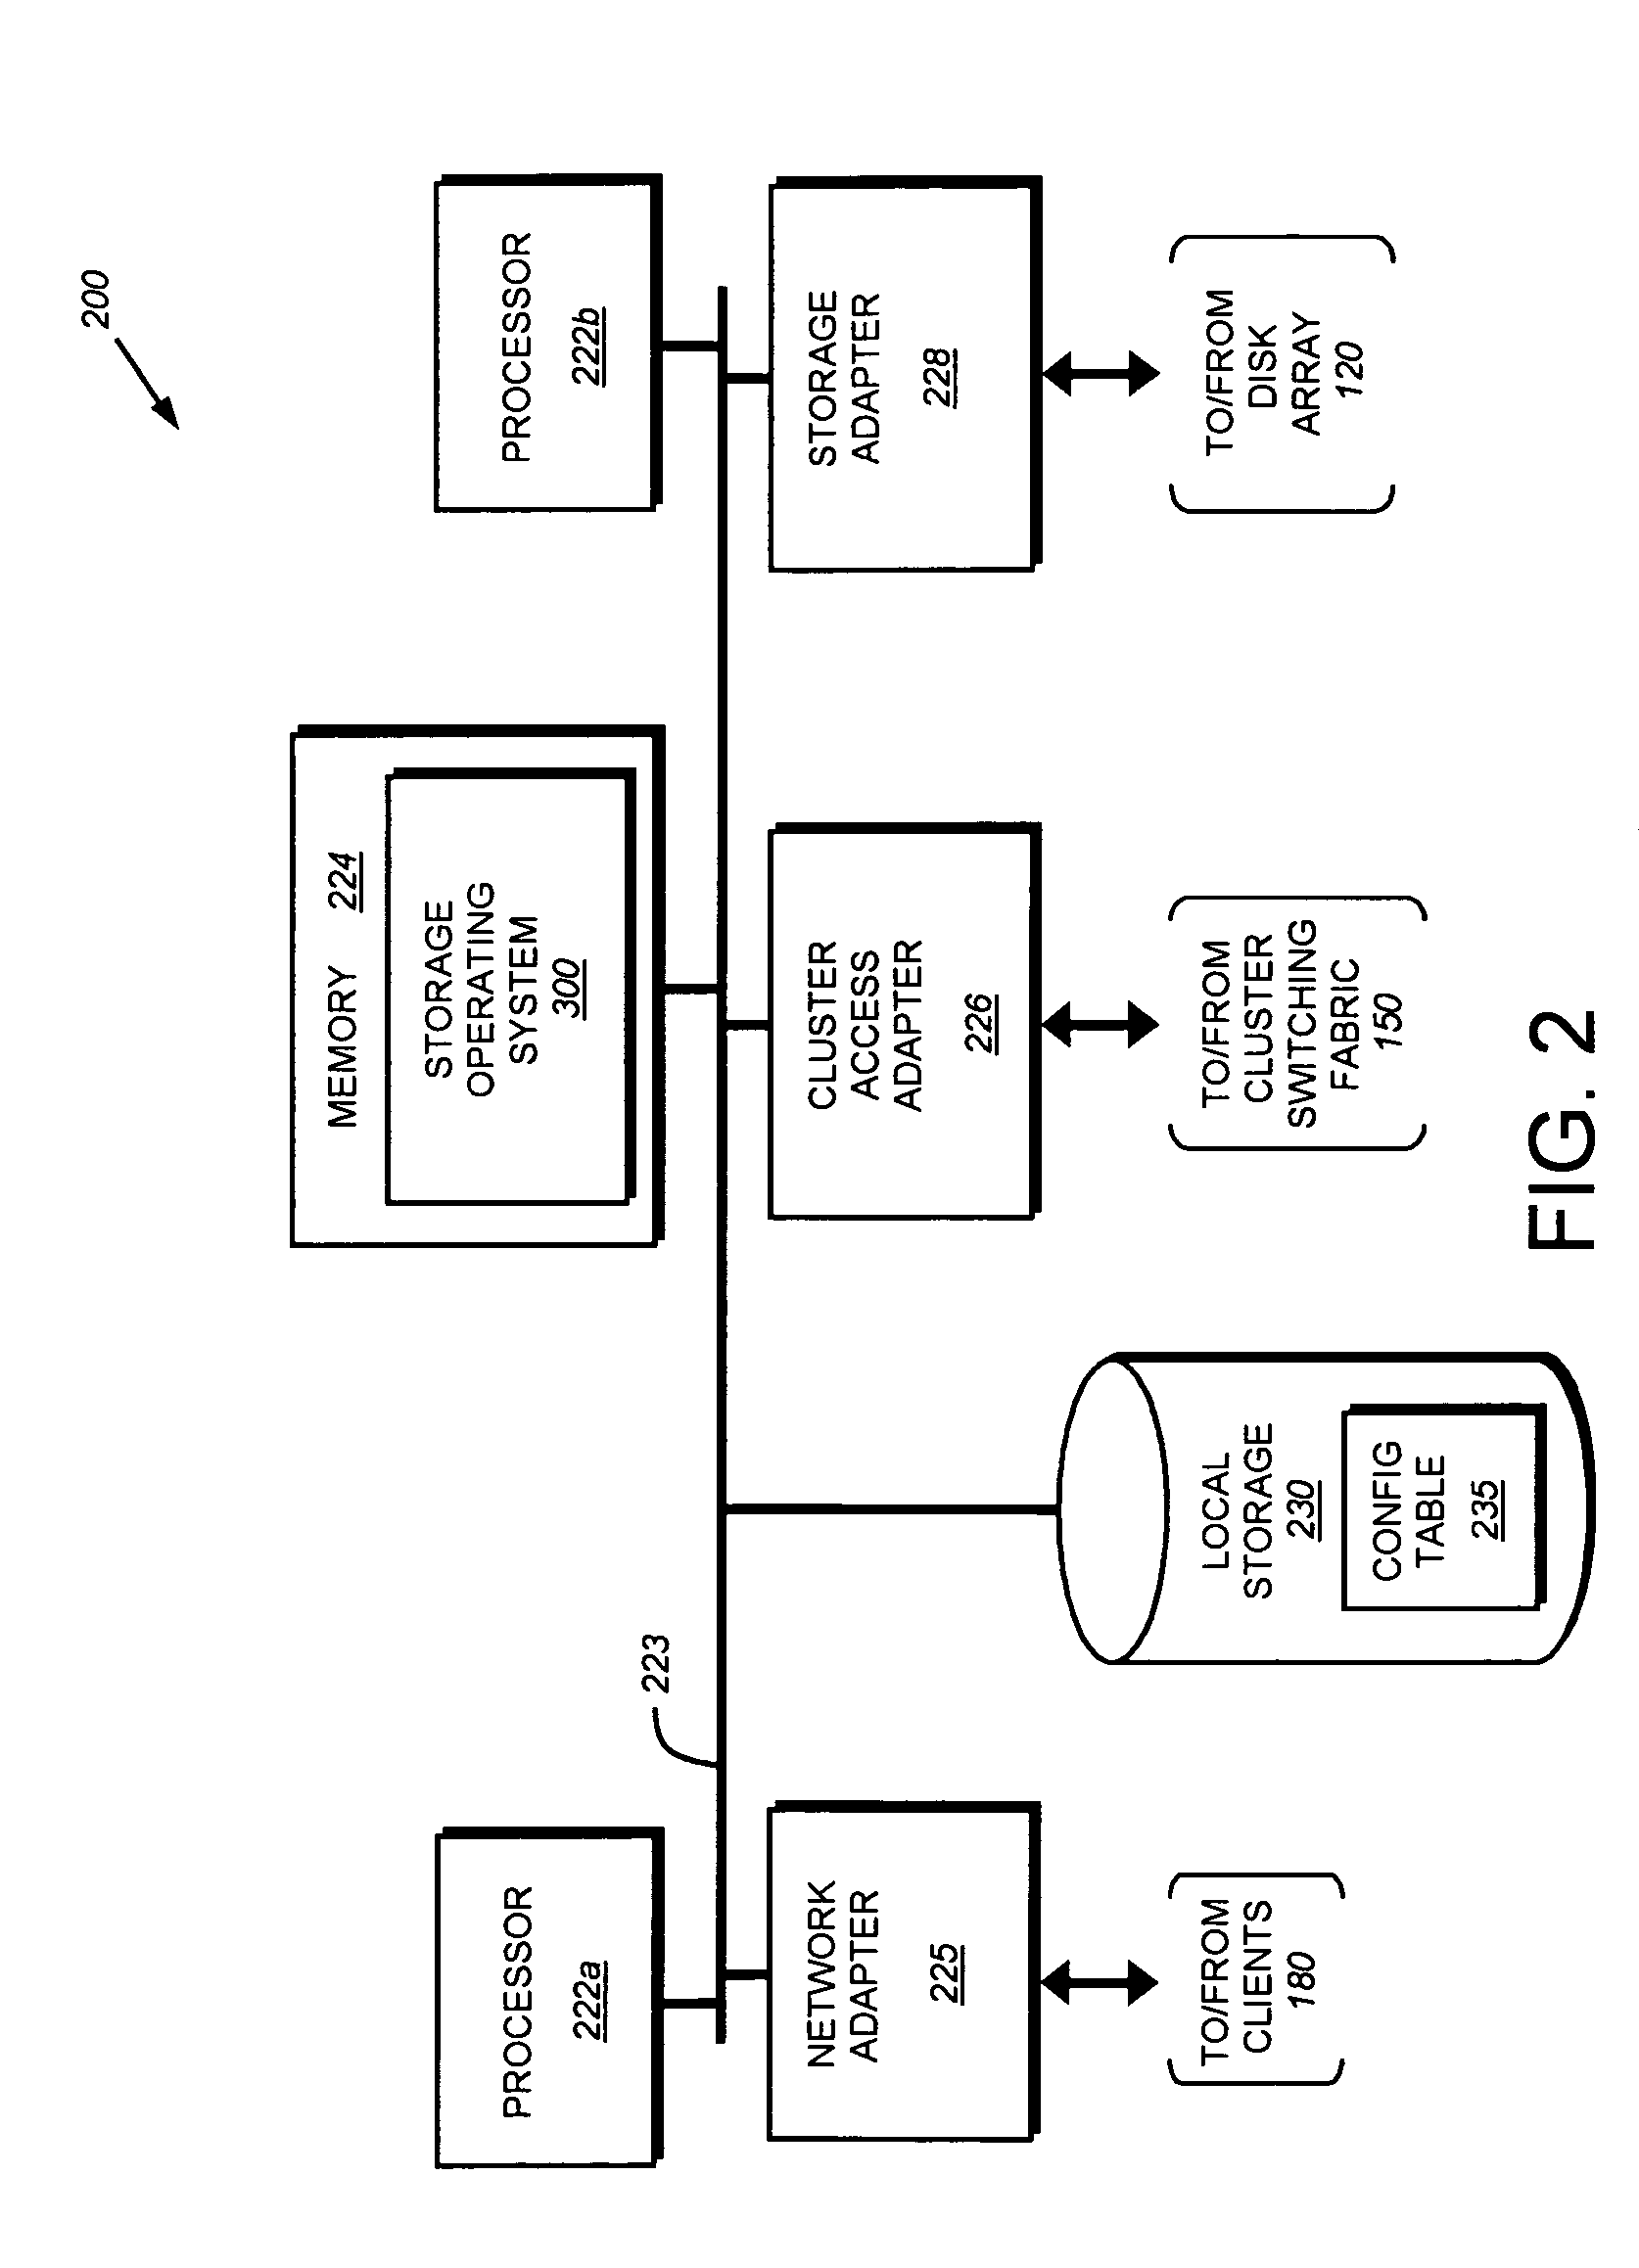 System and method for multi-tiered meta-data caching and distribution in a clustered computer environment